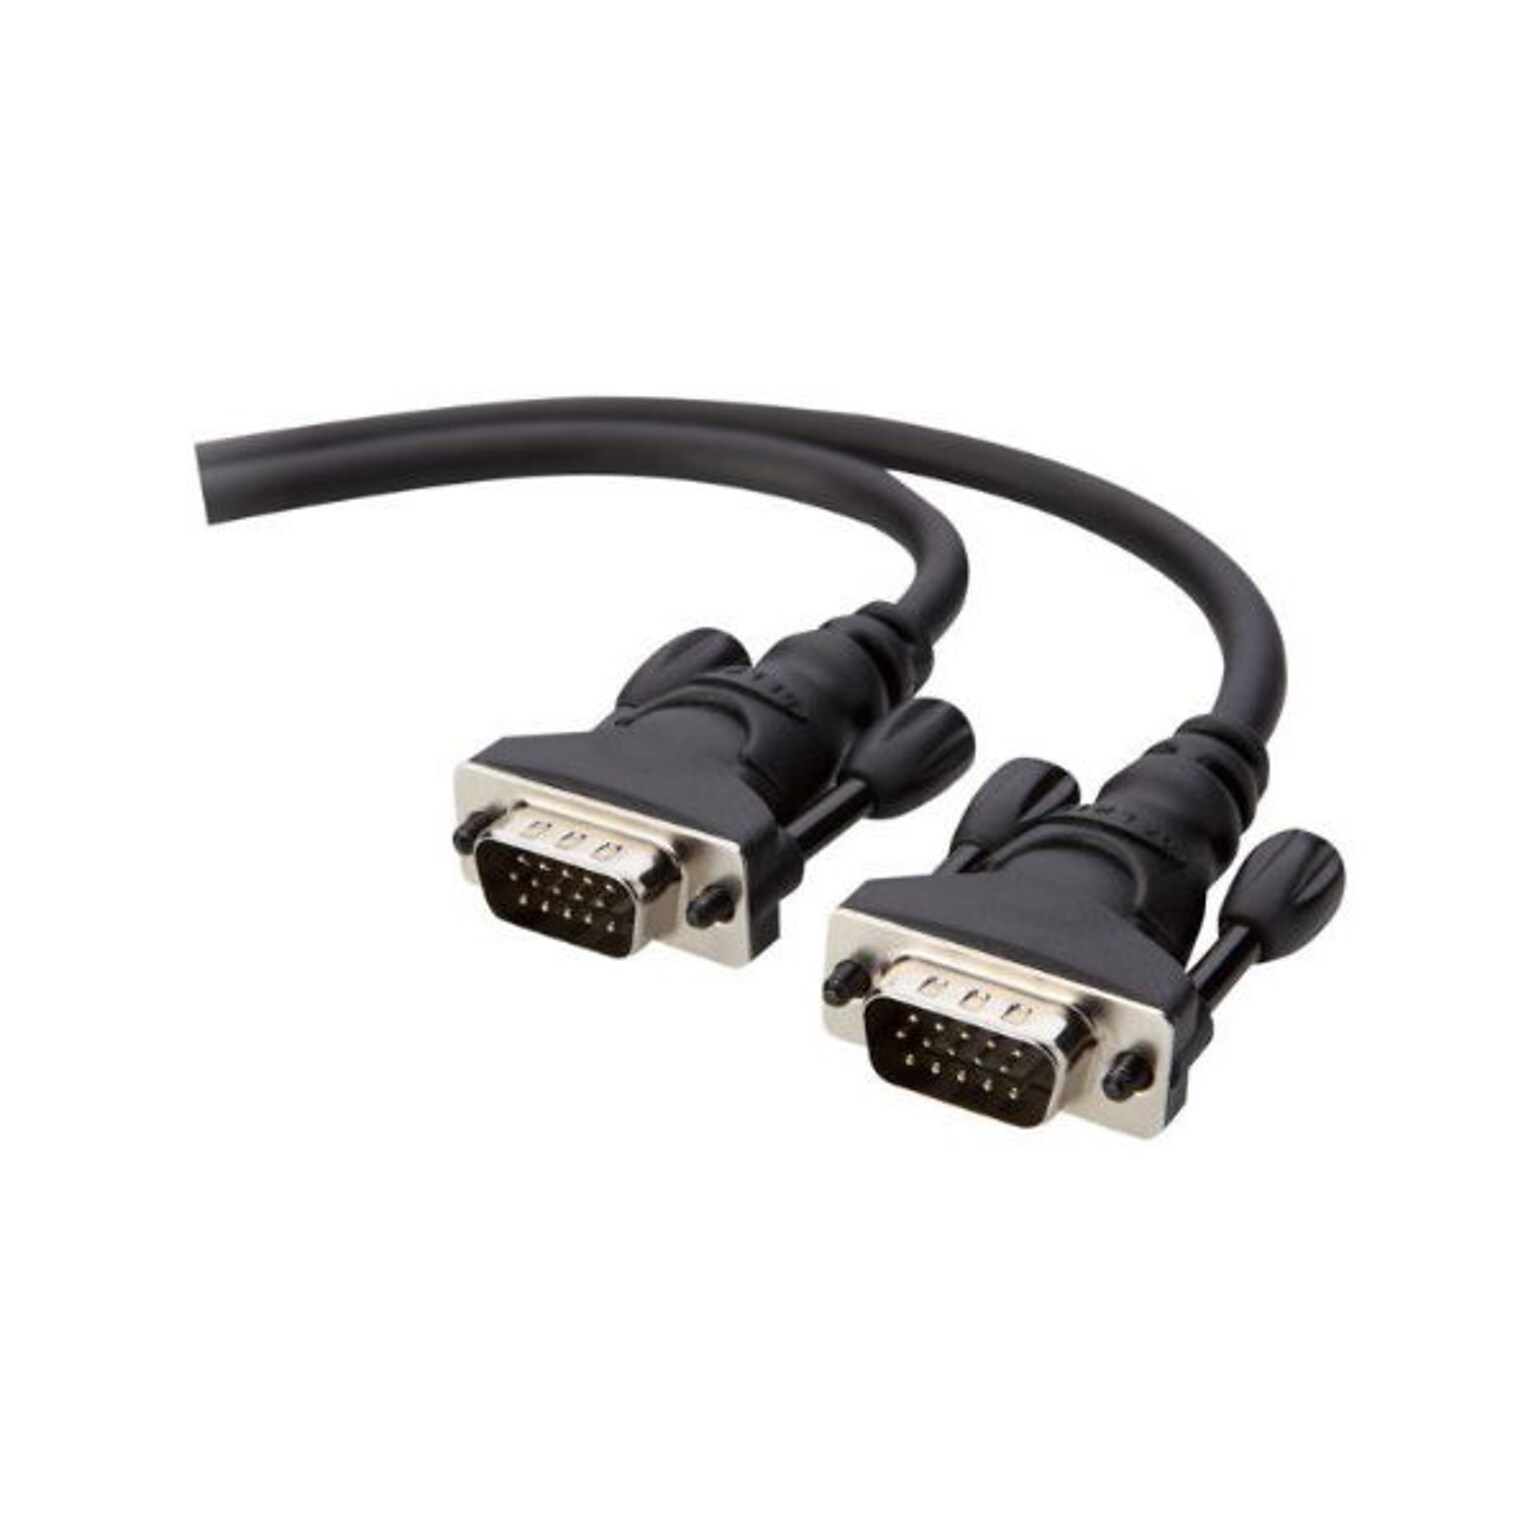 Belkin™ Pro 10 VGA Monitor Signal Replacement Cable